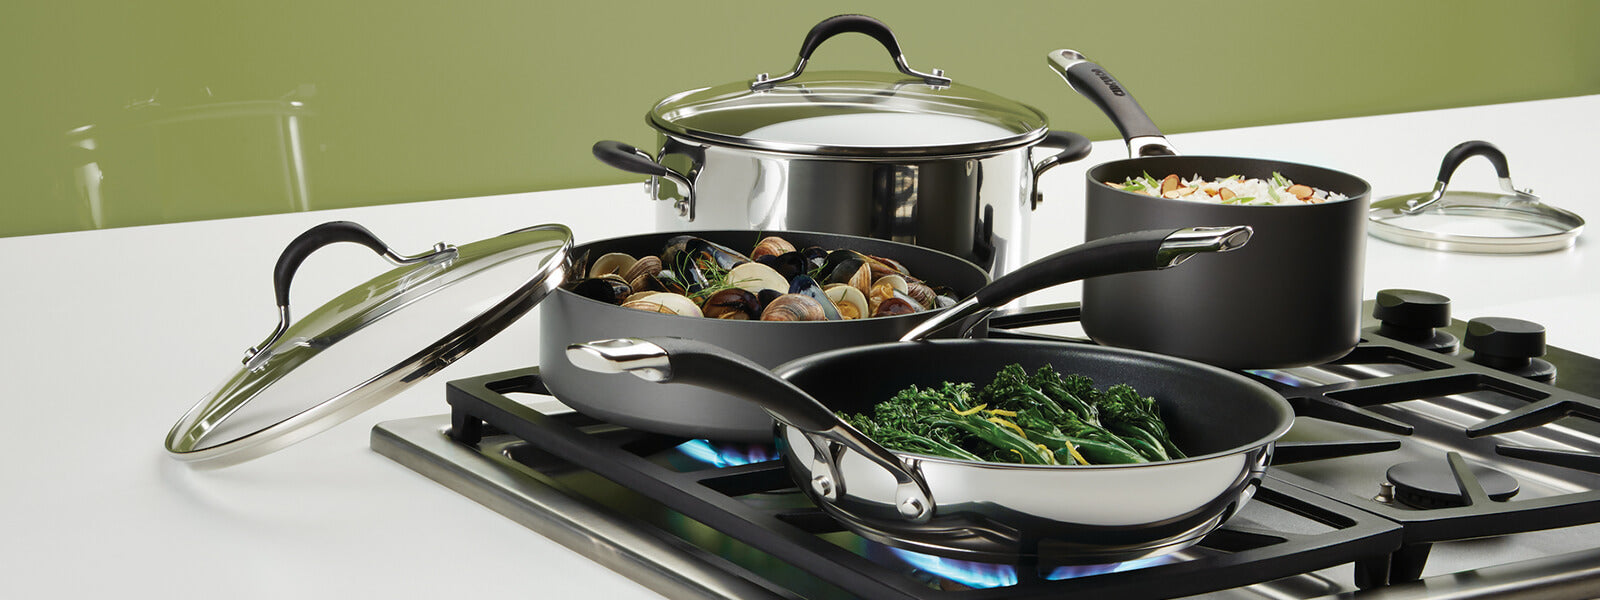 Can stainless steel pan be used for Deep Frying? - PotsandPans India